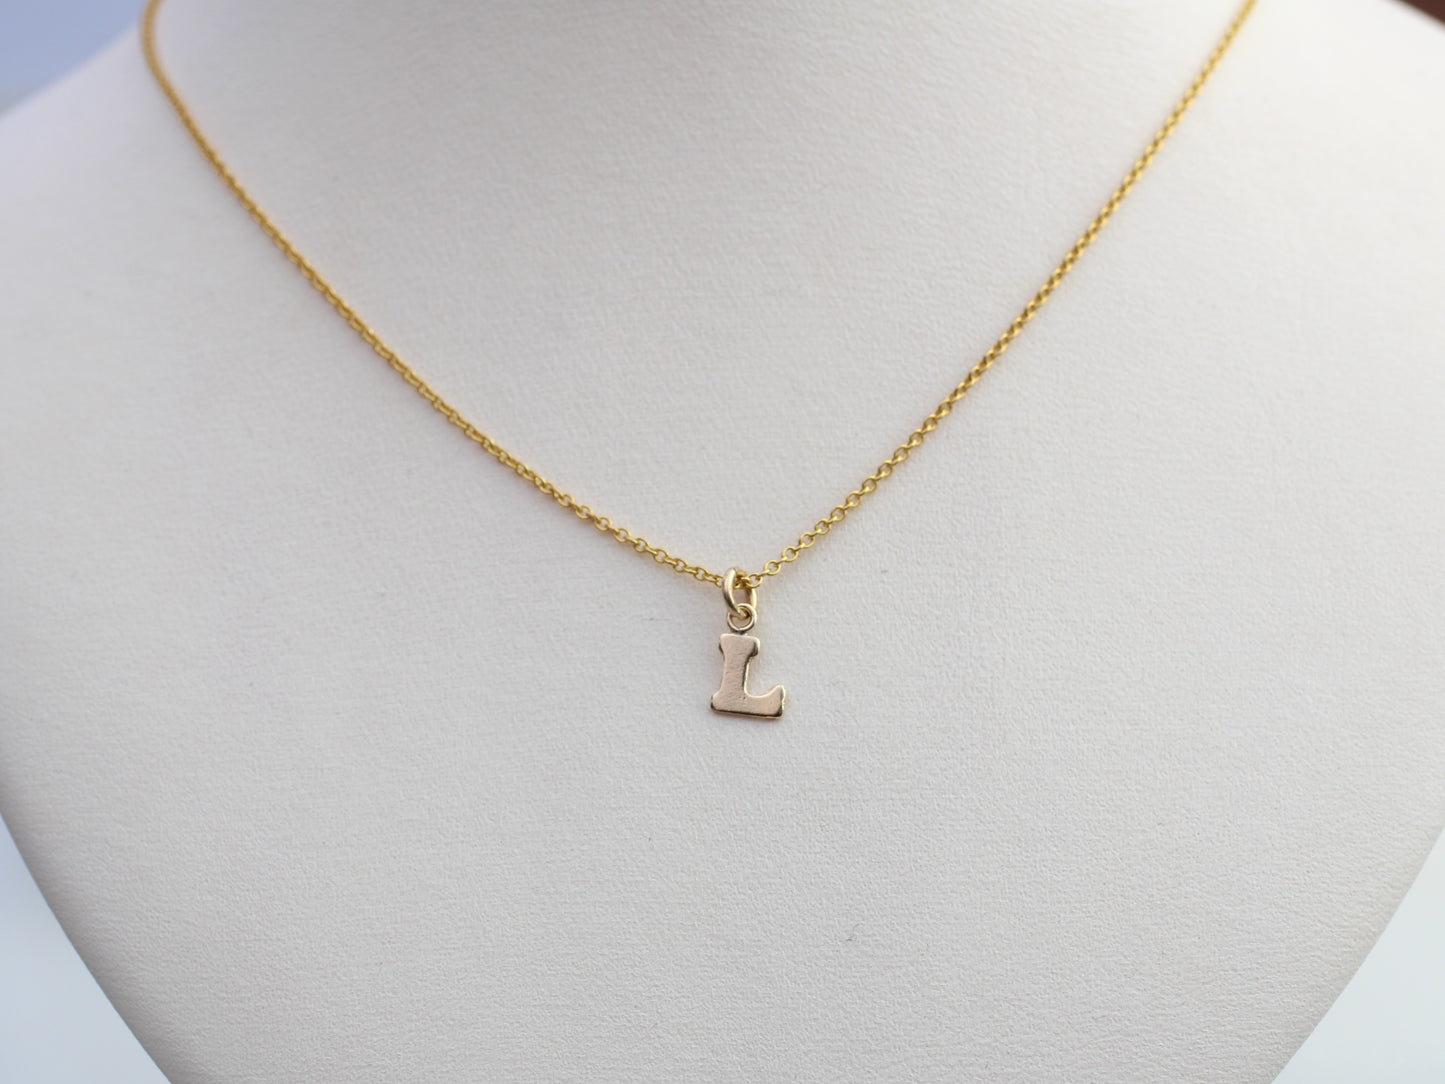 Gold initial necklace.